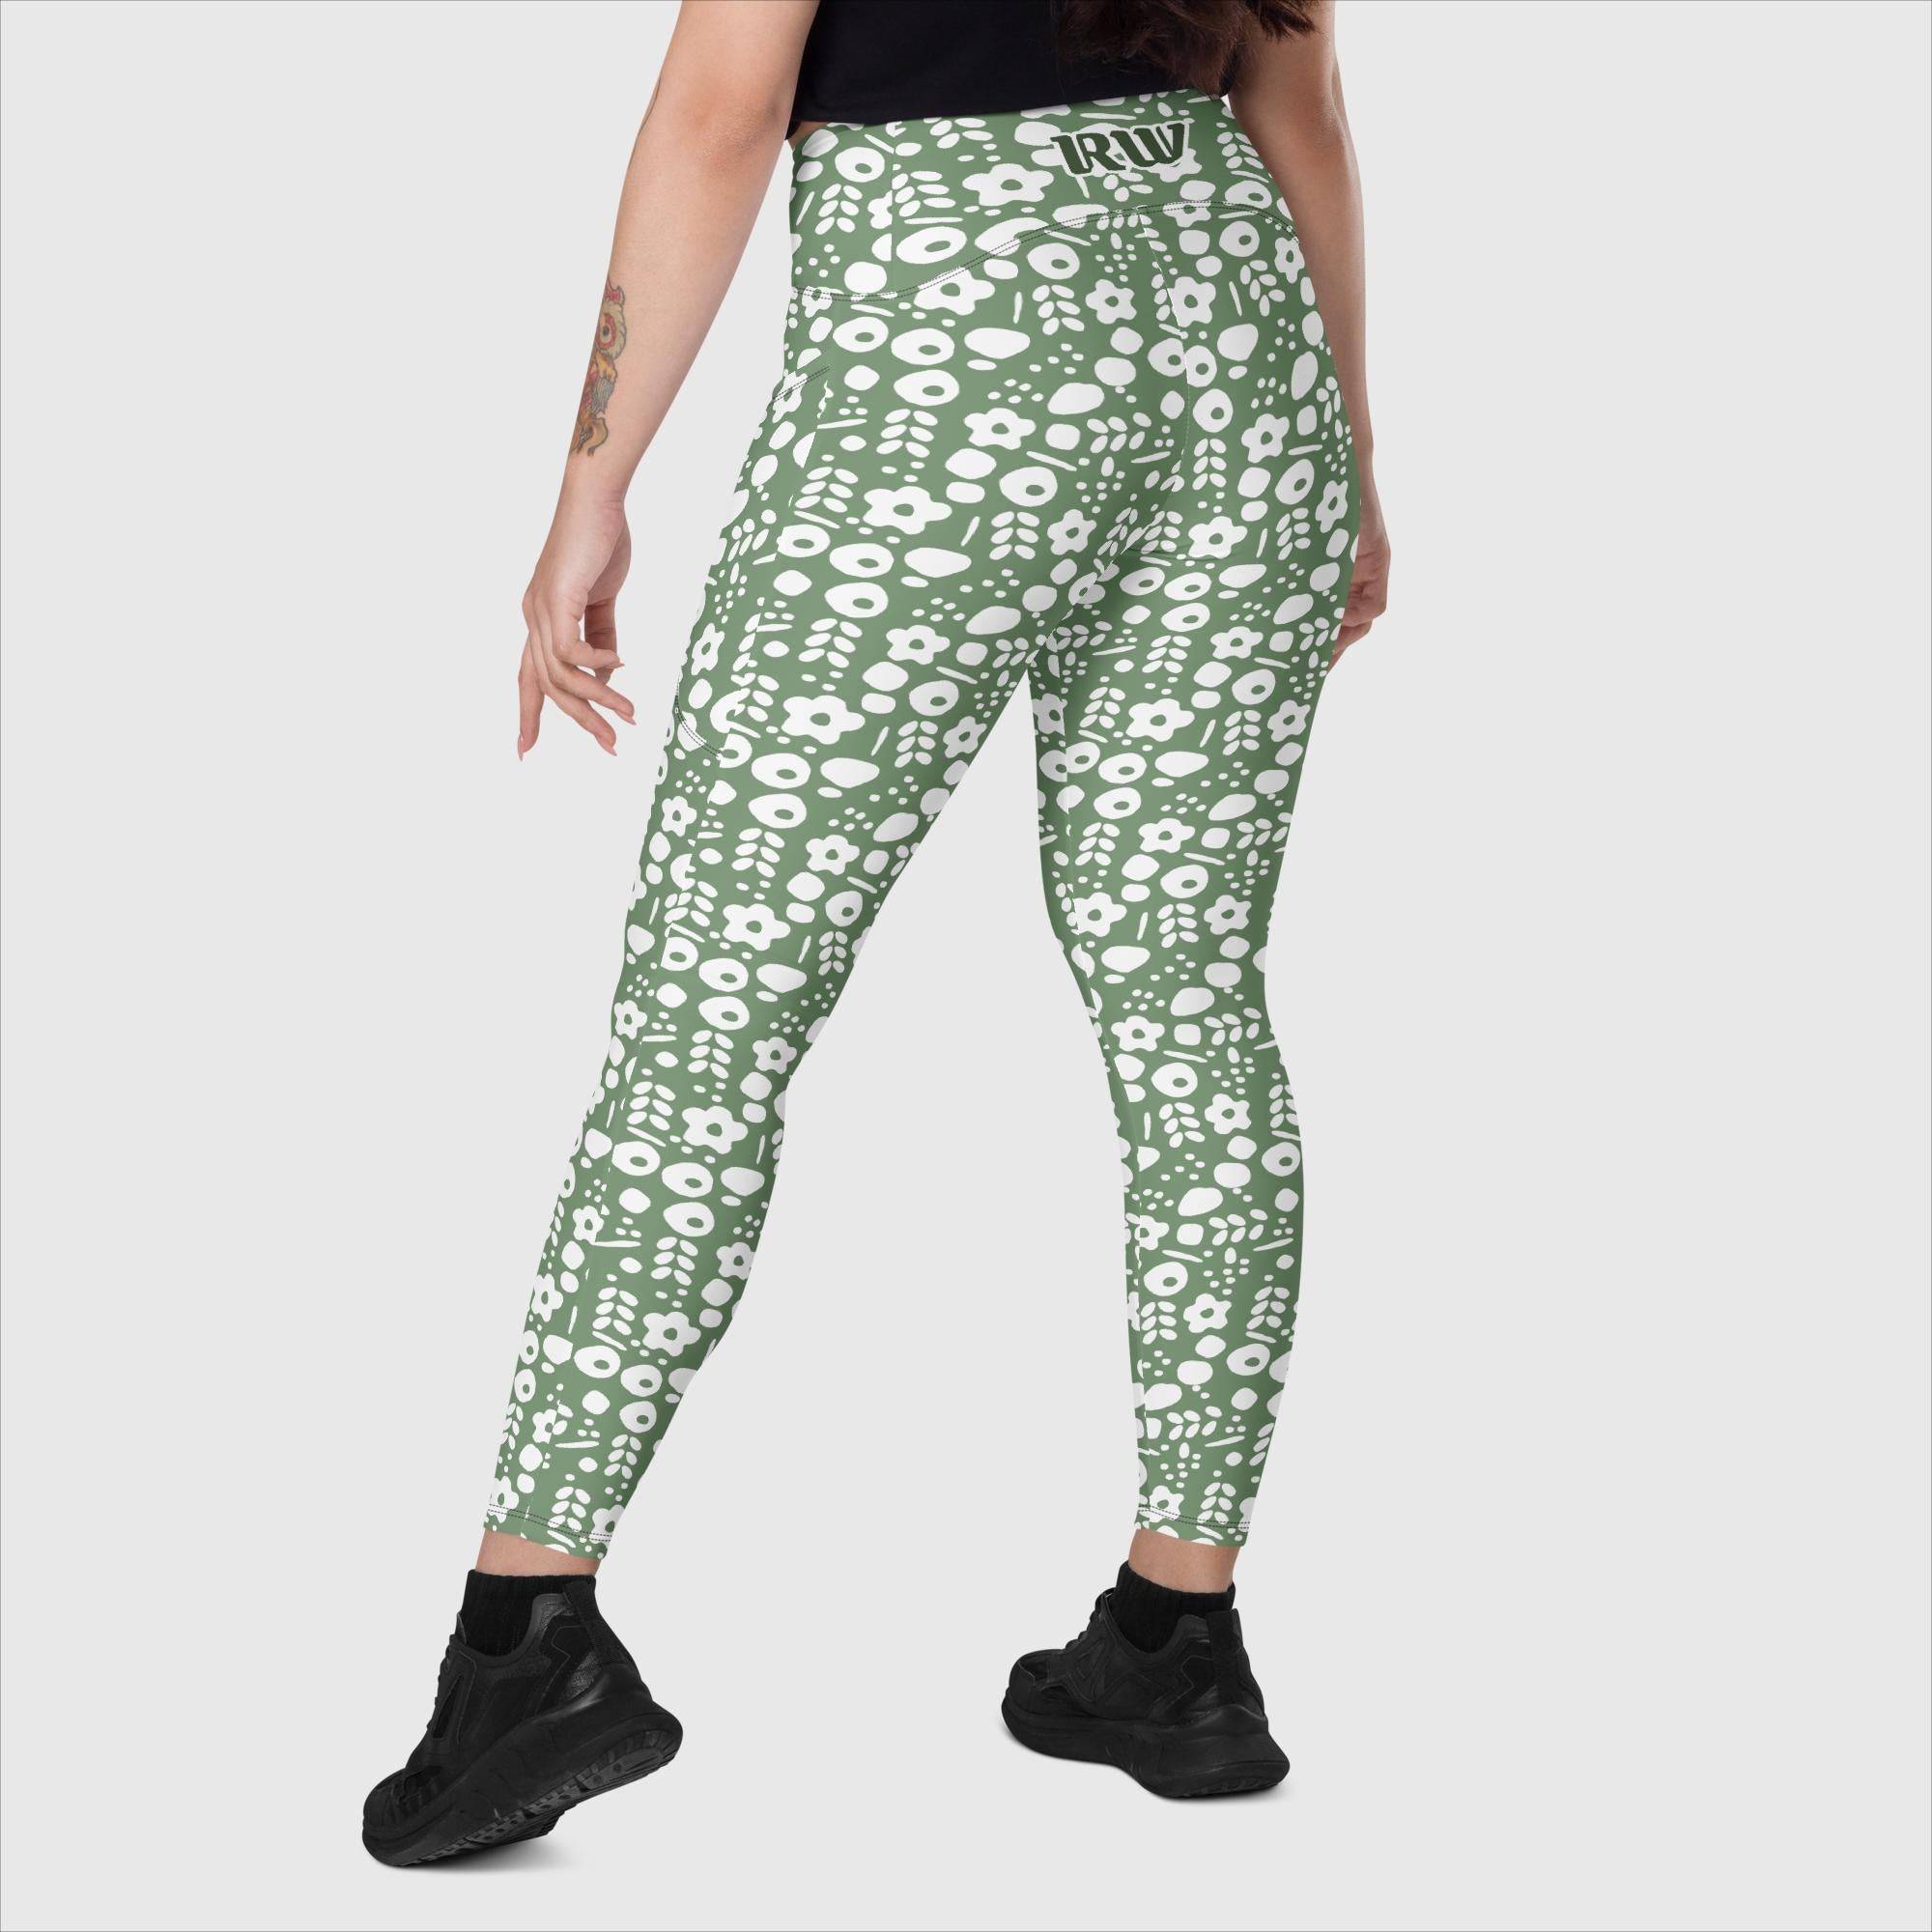 Women's recycled leggings with side pockets in a green and white pattern.